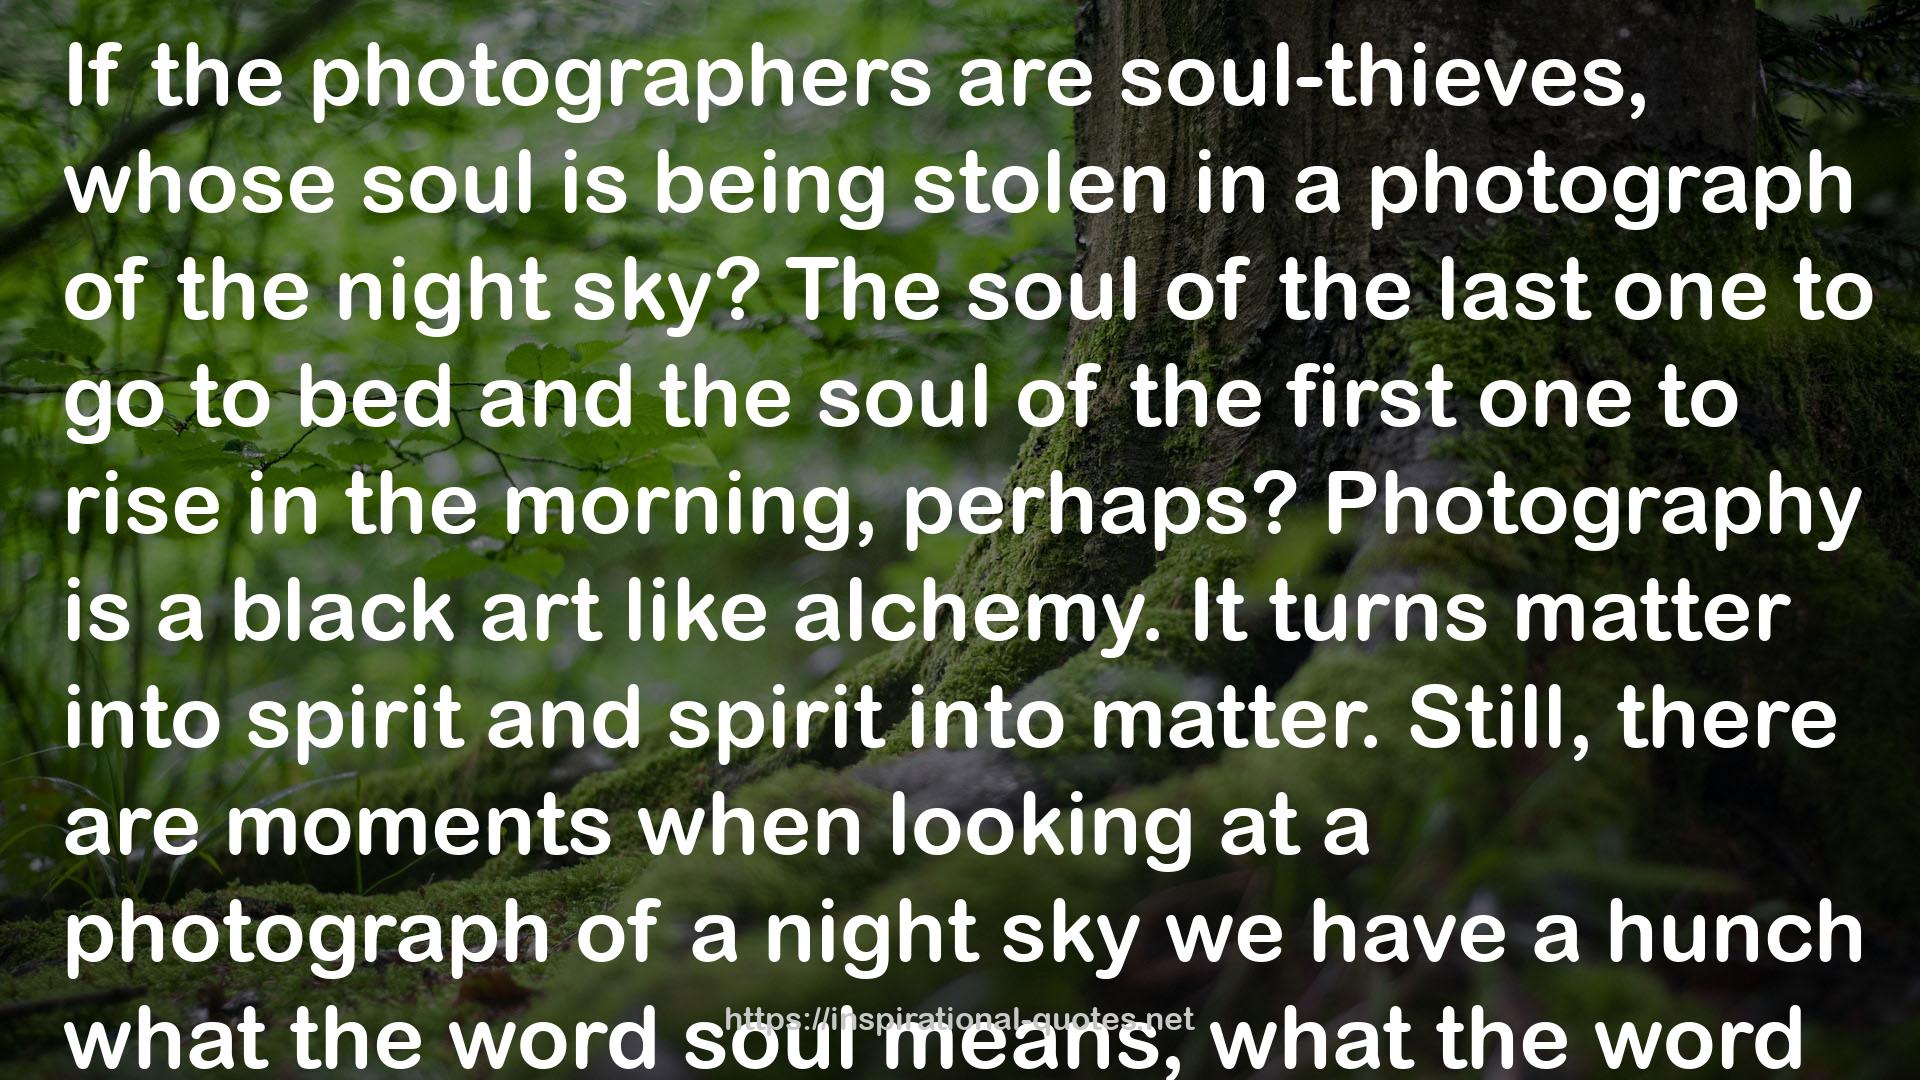 The Life of Images: Selected Prose QUOTES